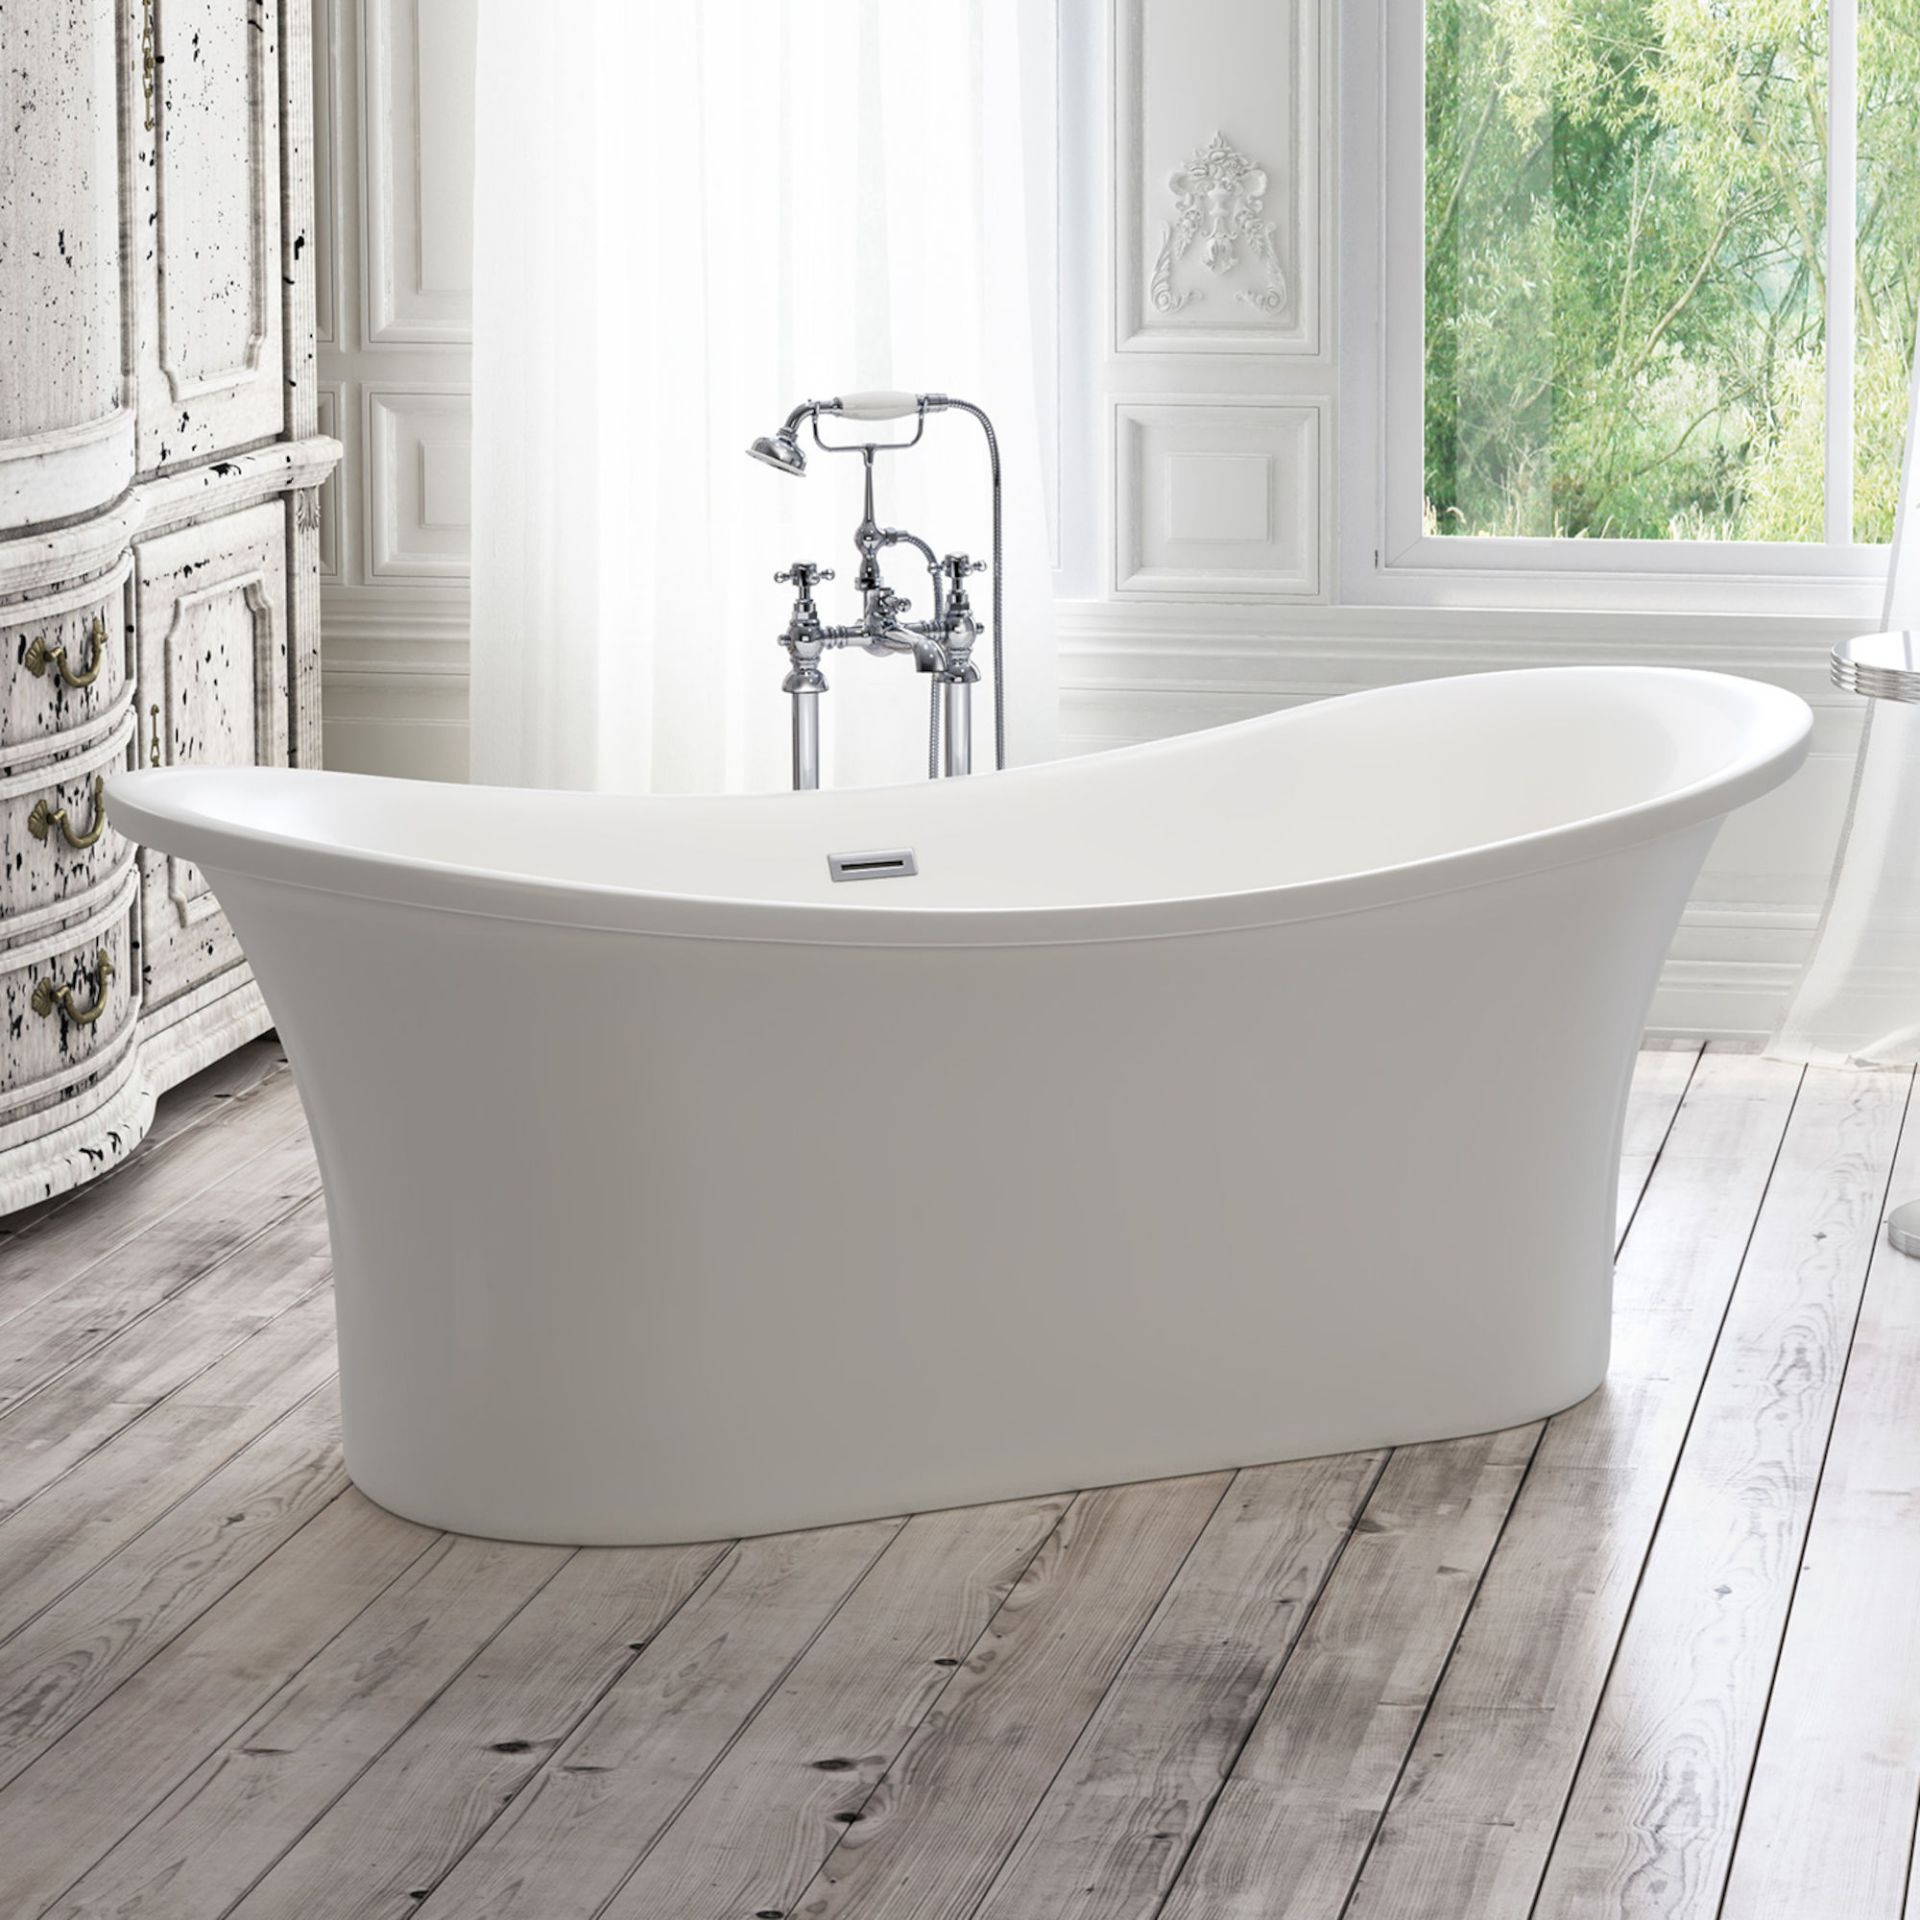 (YC5) 1815mmx800mm Freya Freestanding Bath. Manufactured from High Quality Acrylic, complimented